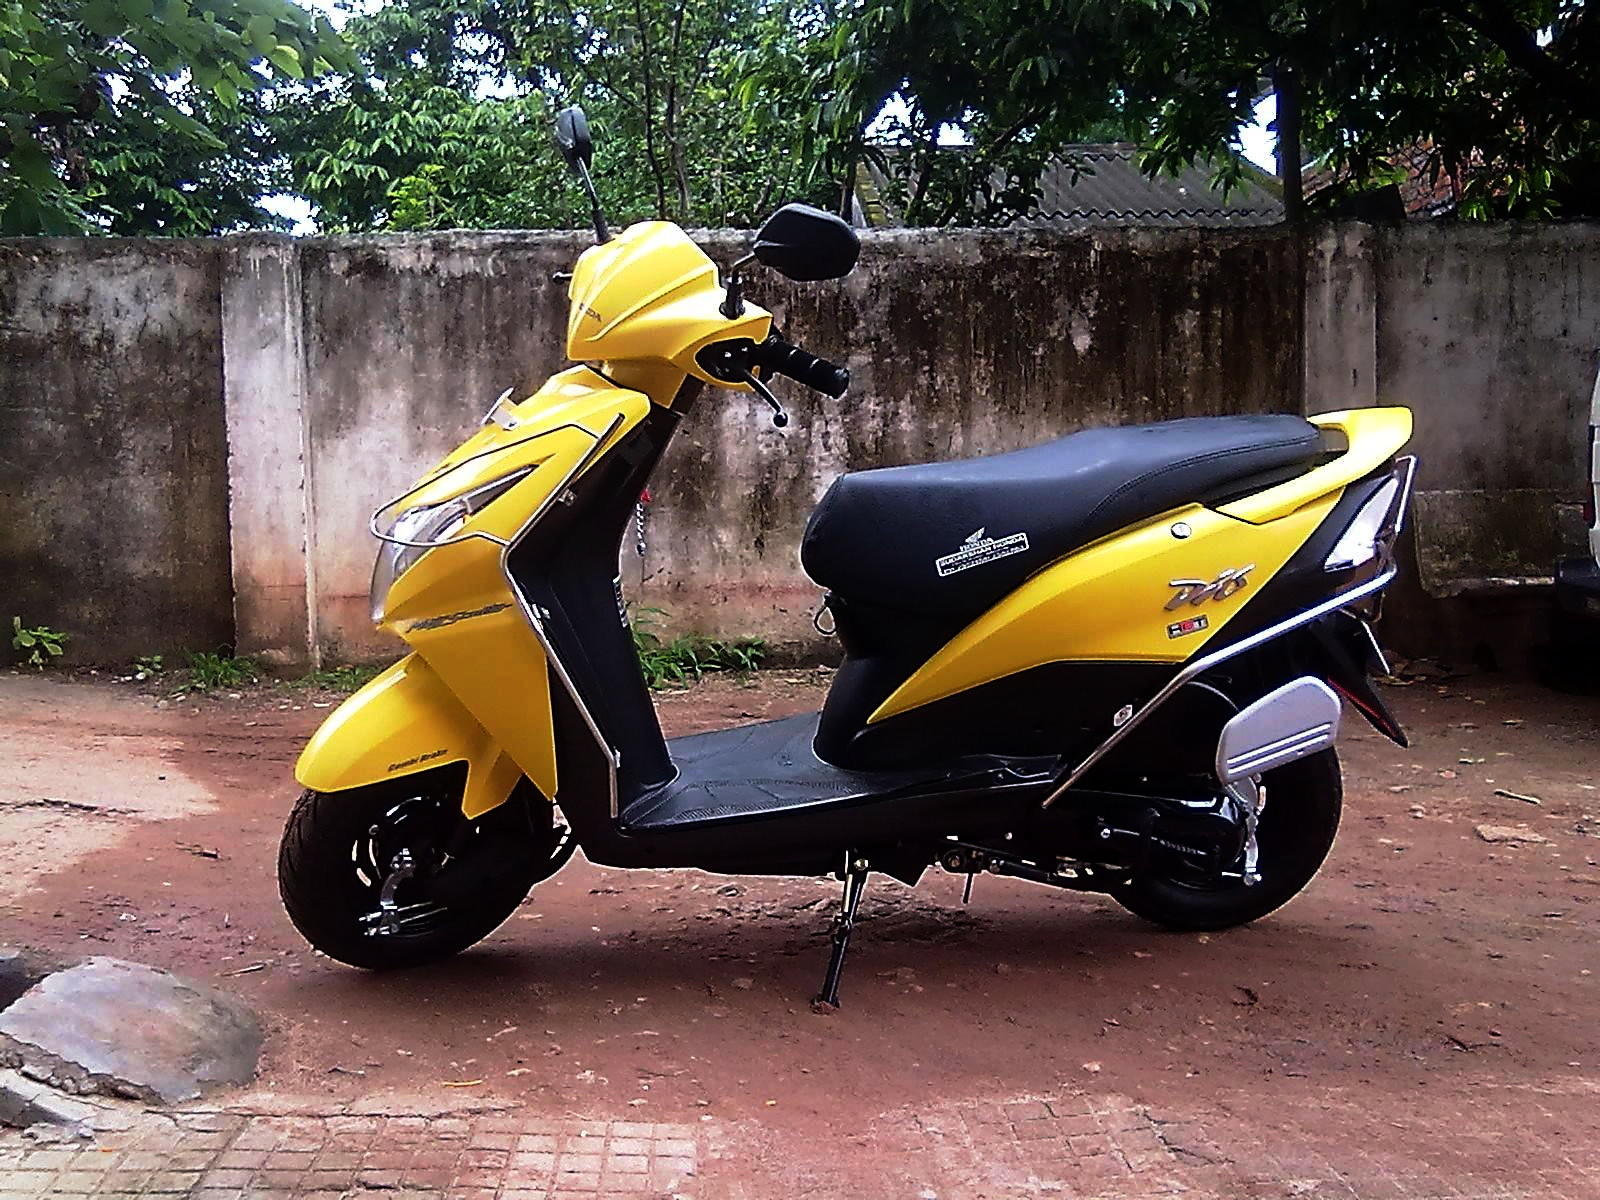 Honda: Two Wheelers In May: Honda Dio Enters The Elite List For The First Time In Six Years, Auto News, ET Auto